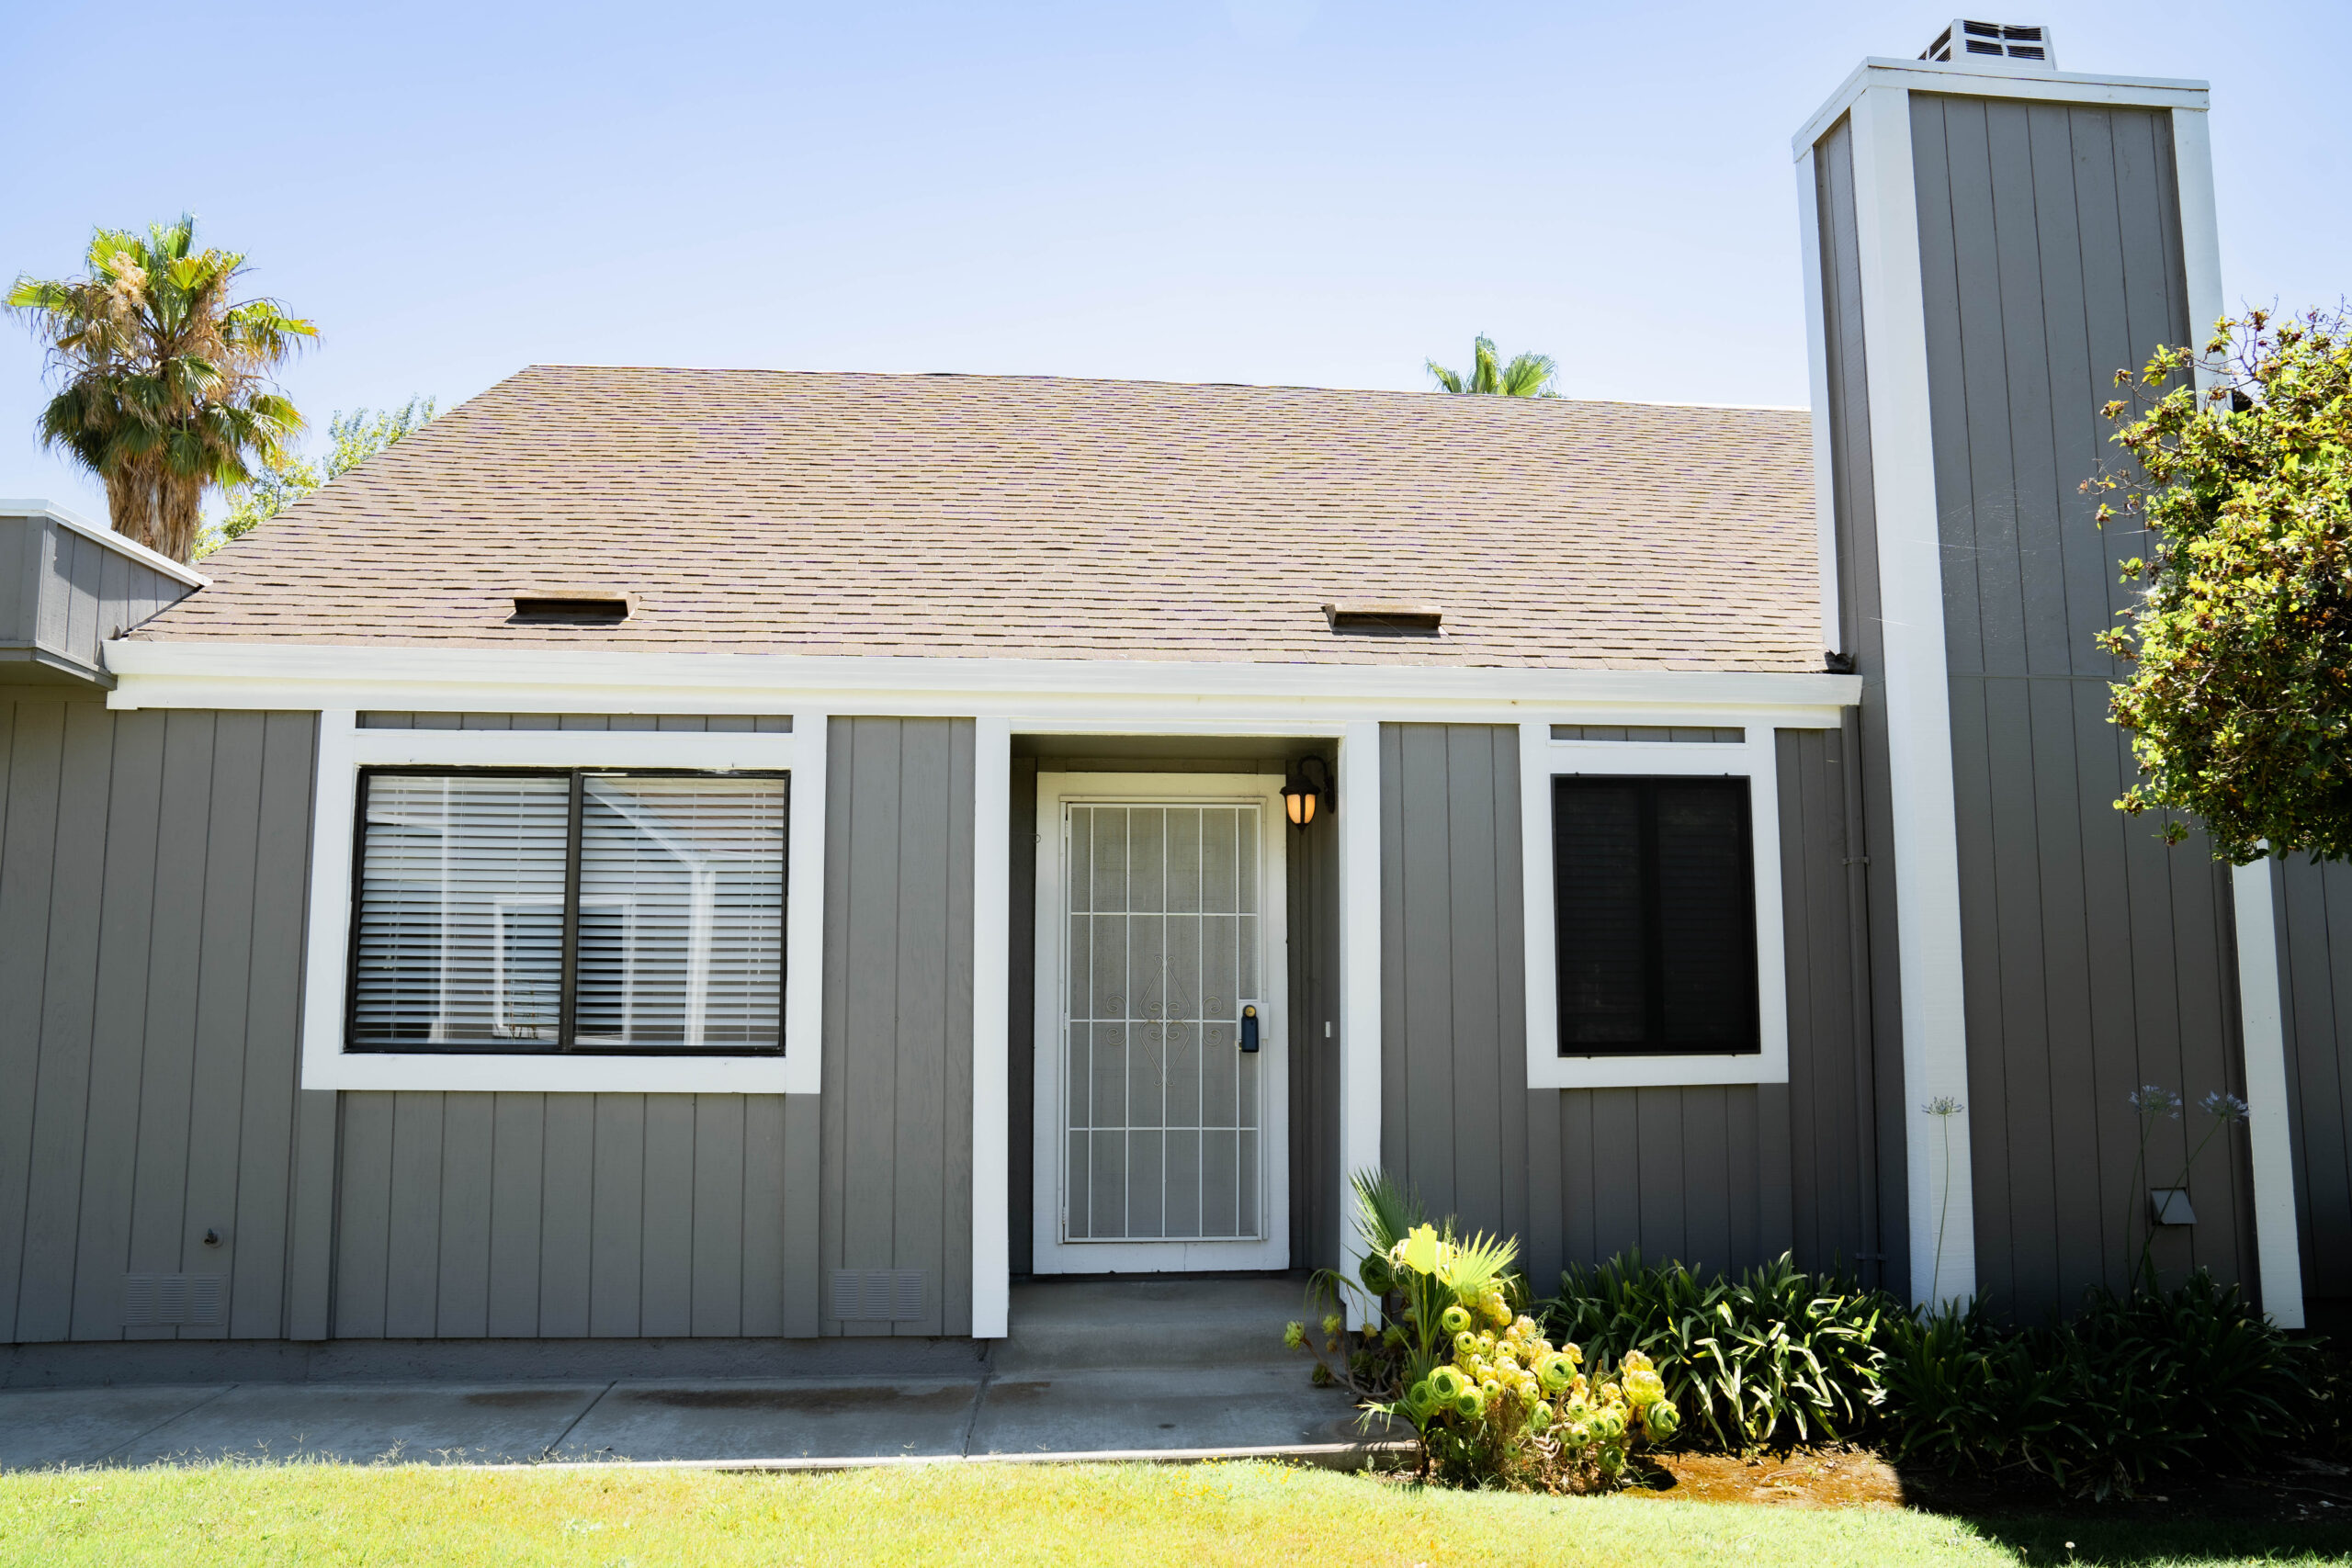 The Insulating Benefits of James Hardie Siding for a Cozy Northern California Winter